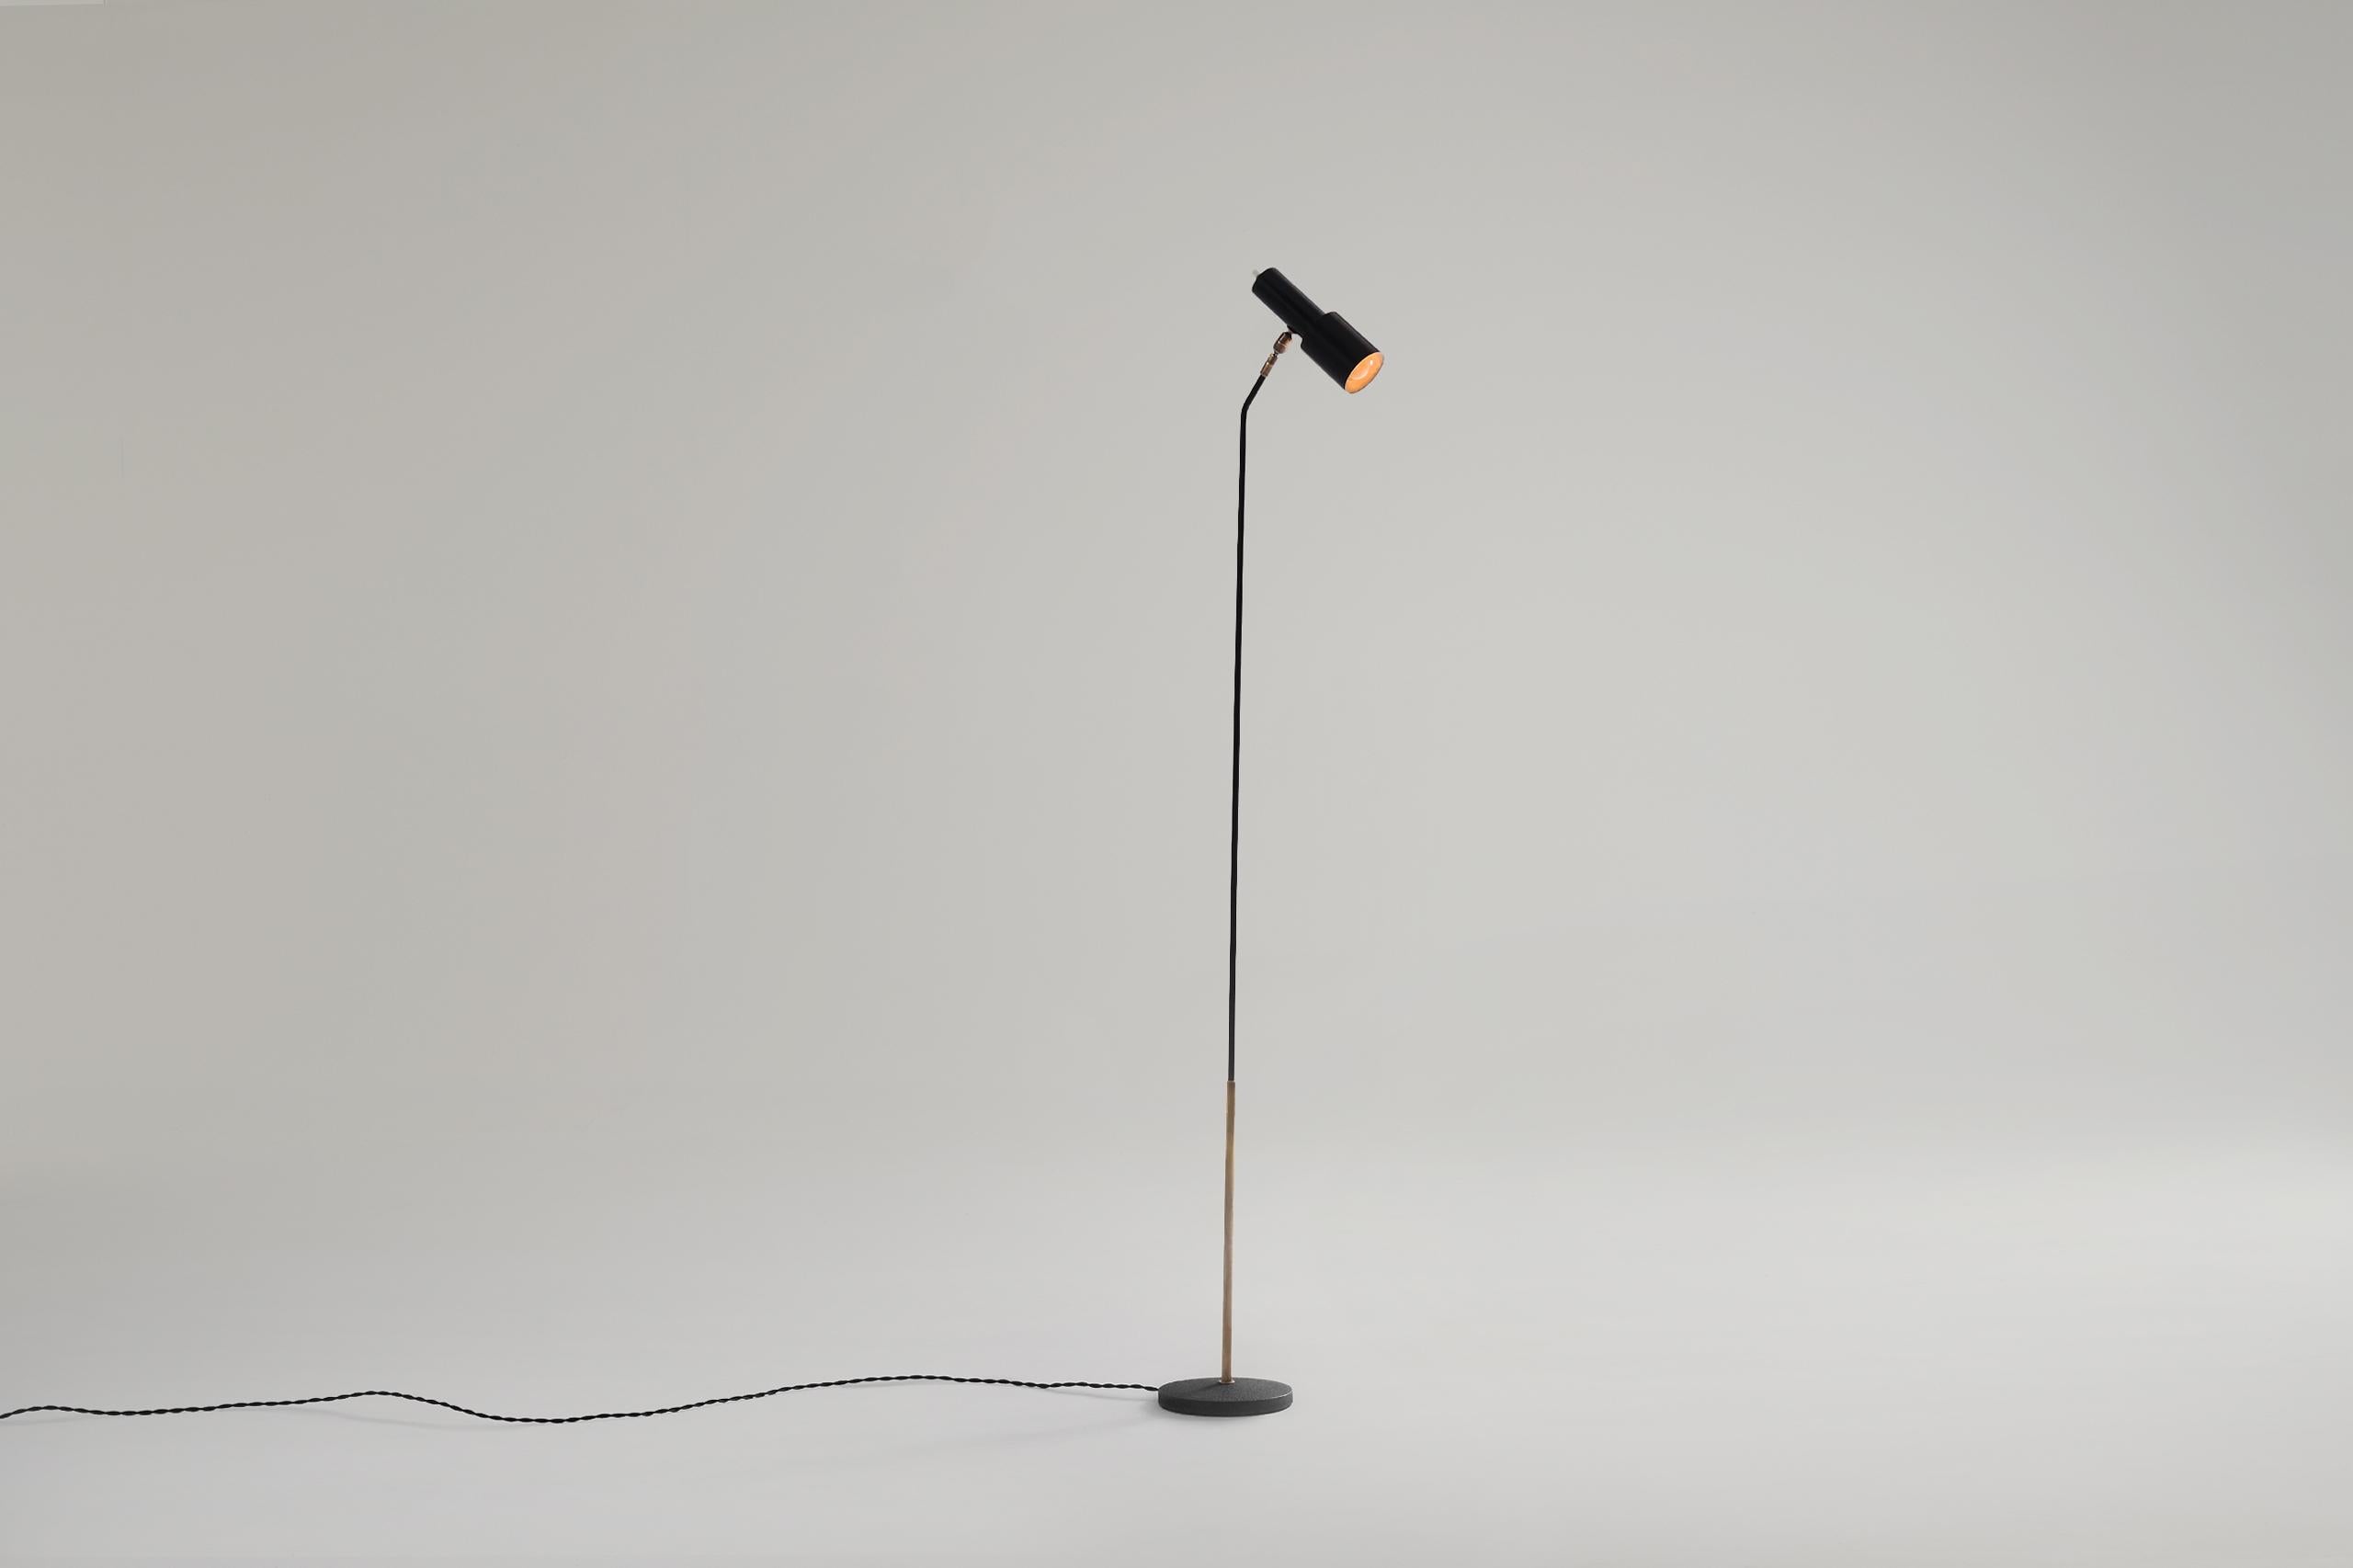 Rare floor lamp 'mod. 1968' by Fontana Arte, Italy, 1960s. Sophisticated design with beautiful refined details. The lamp is constructed out of brass; black lacquered and polished. The round cast iron base is finished with wrinkle lacquer, typical